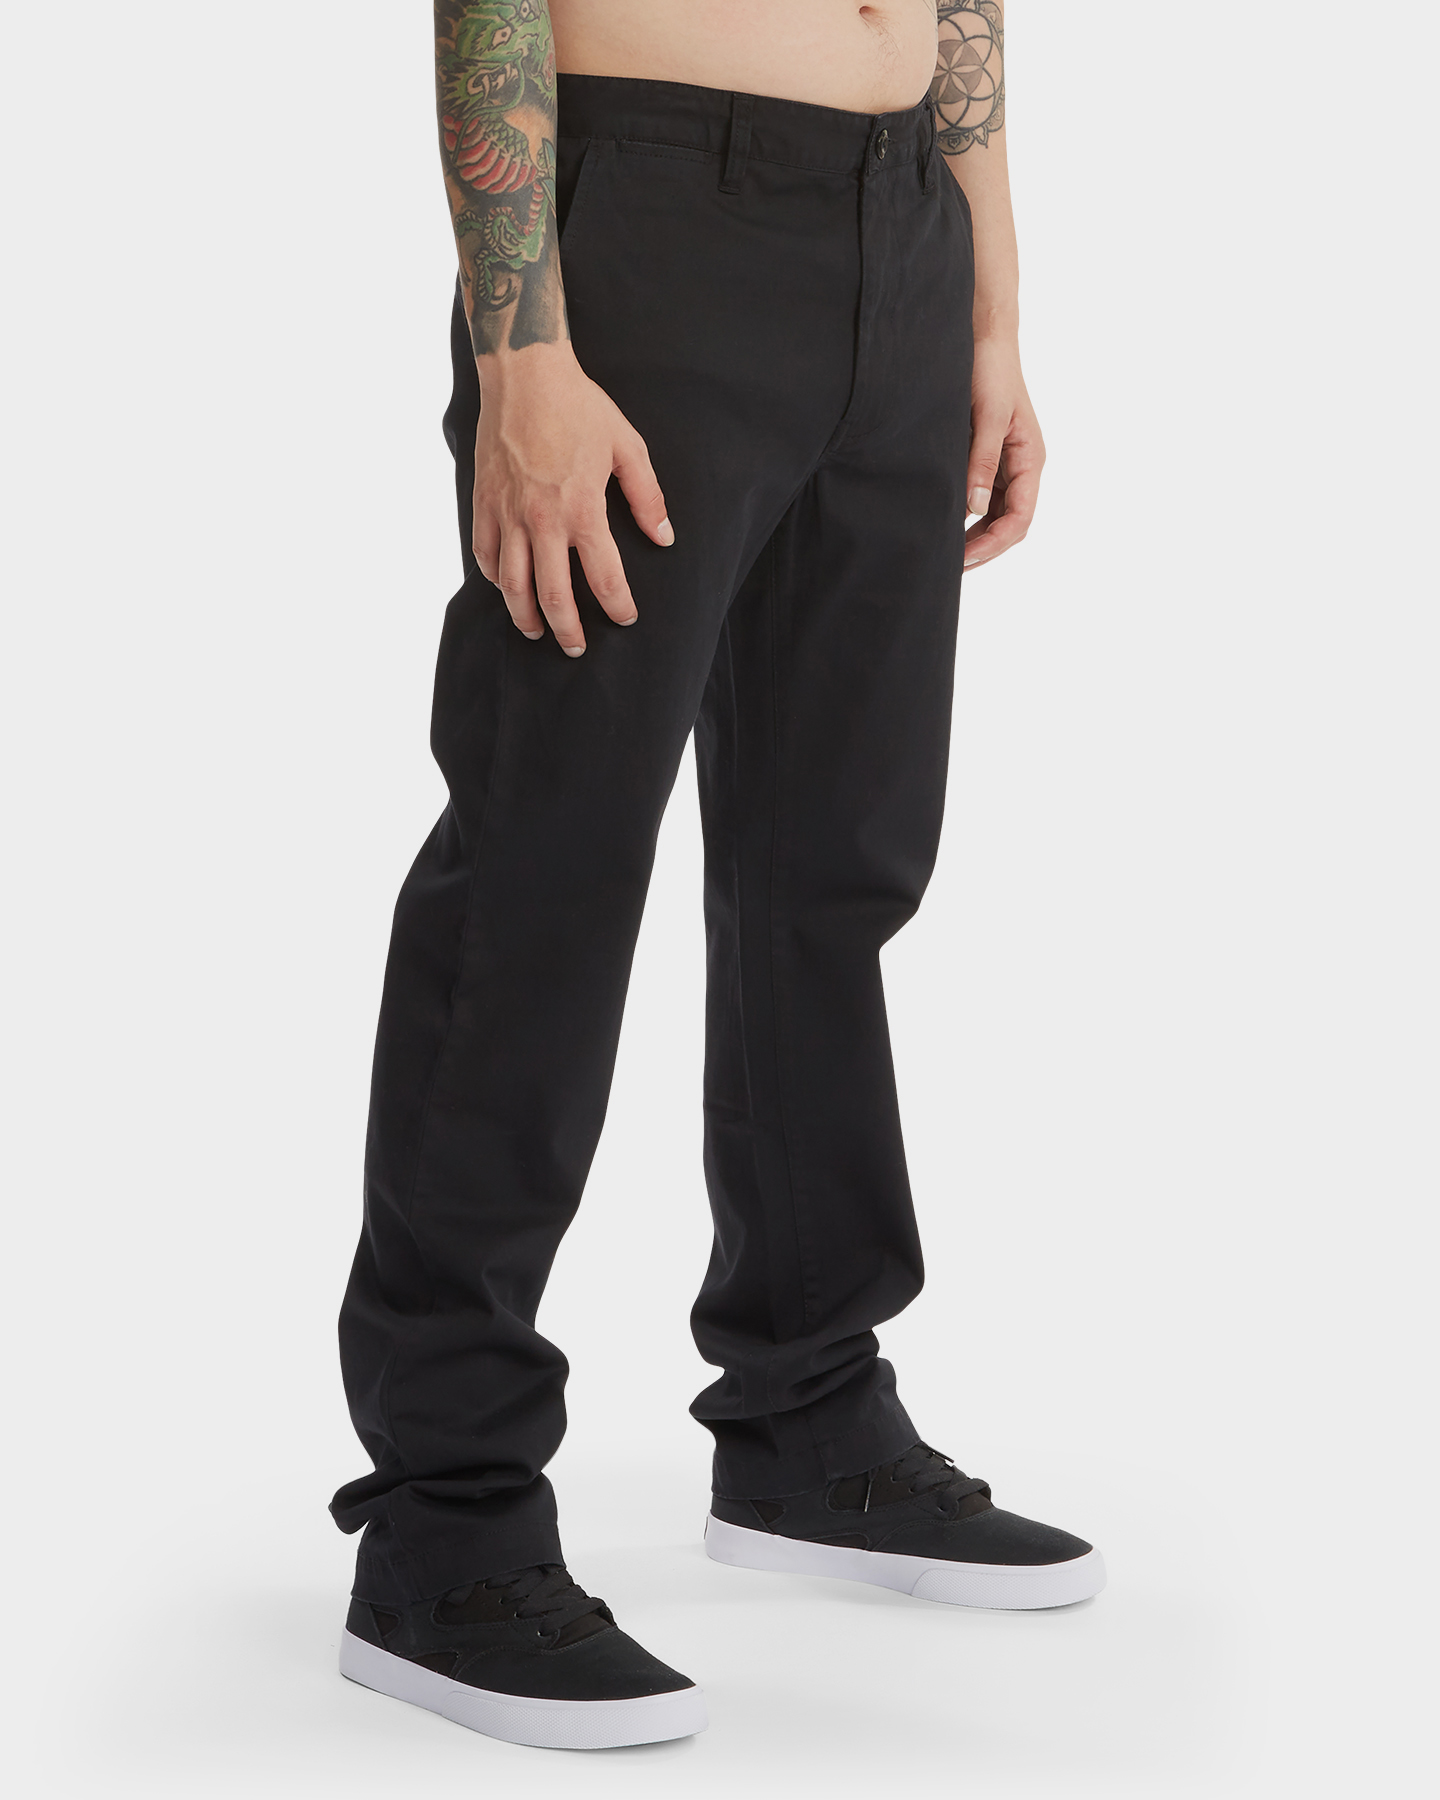 Dc Shoes Mens Worker Chino Pant - Black | SurfStitch